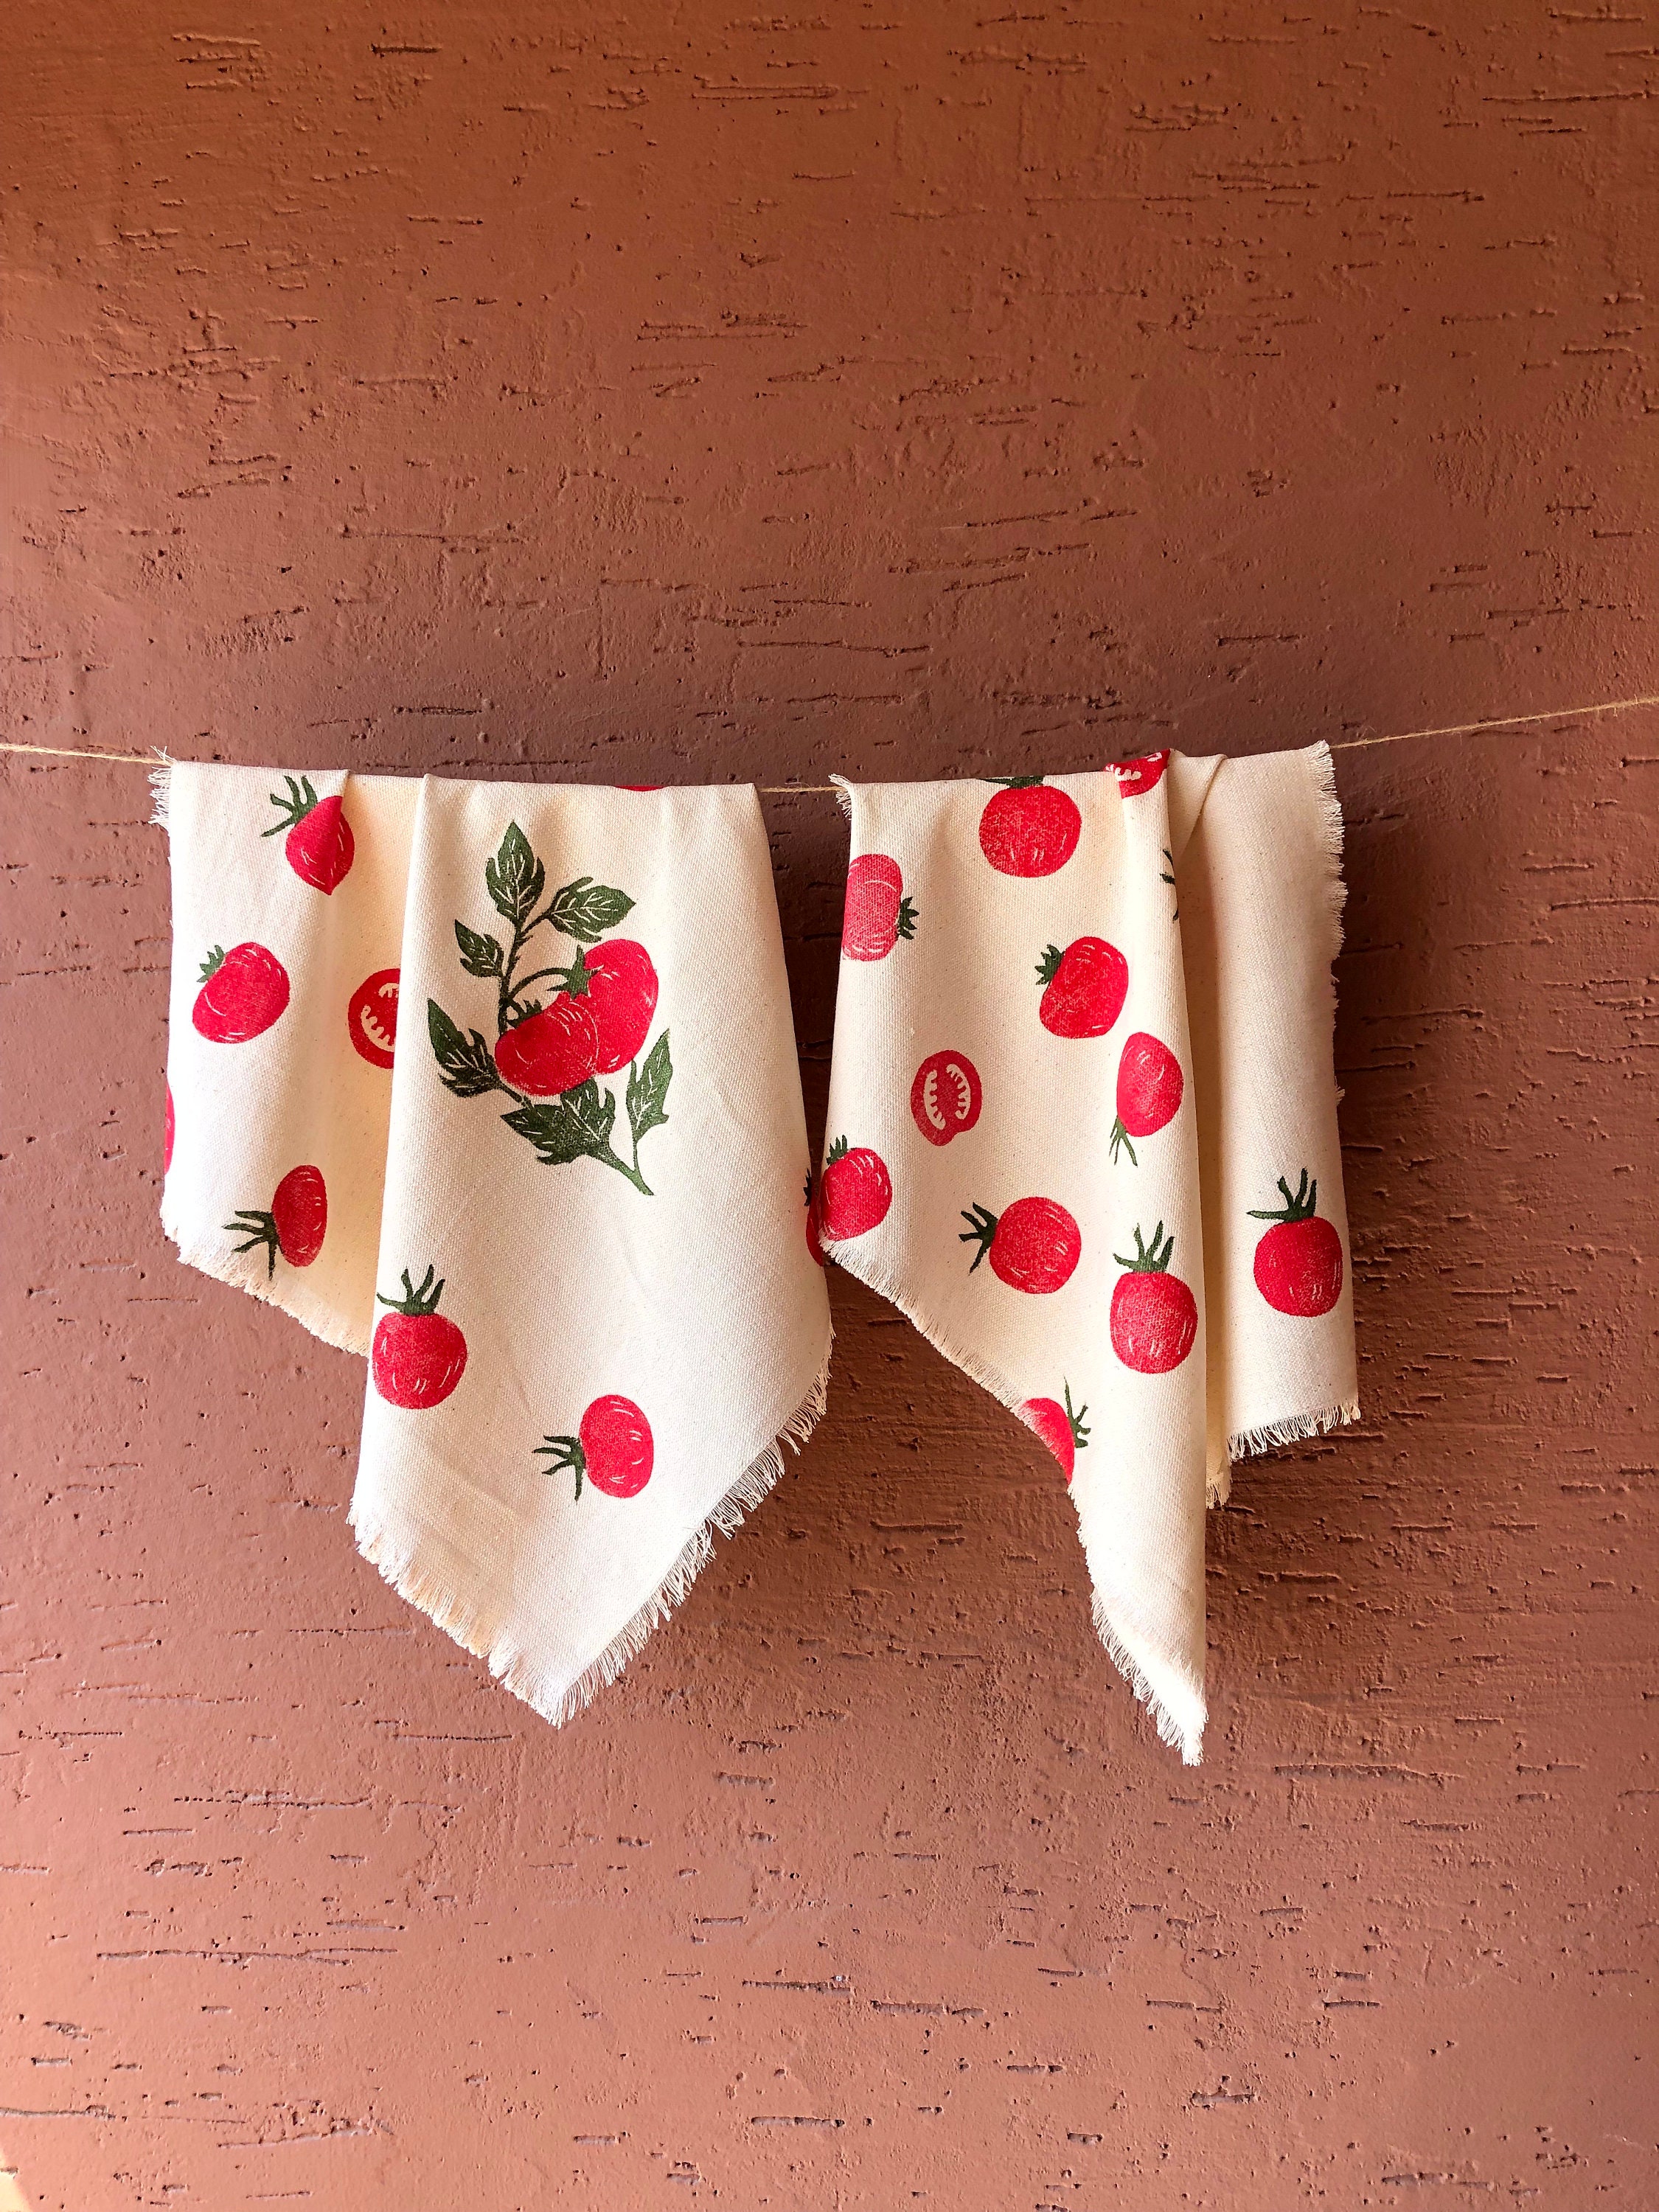 Handwoven Dish Towel - Red Pattern - The Henry Ford